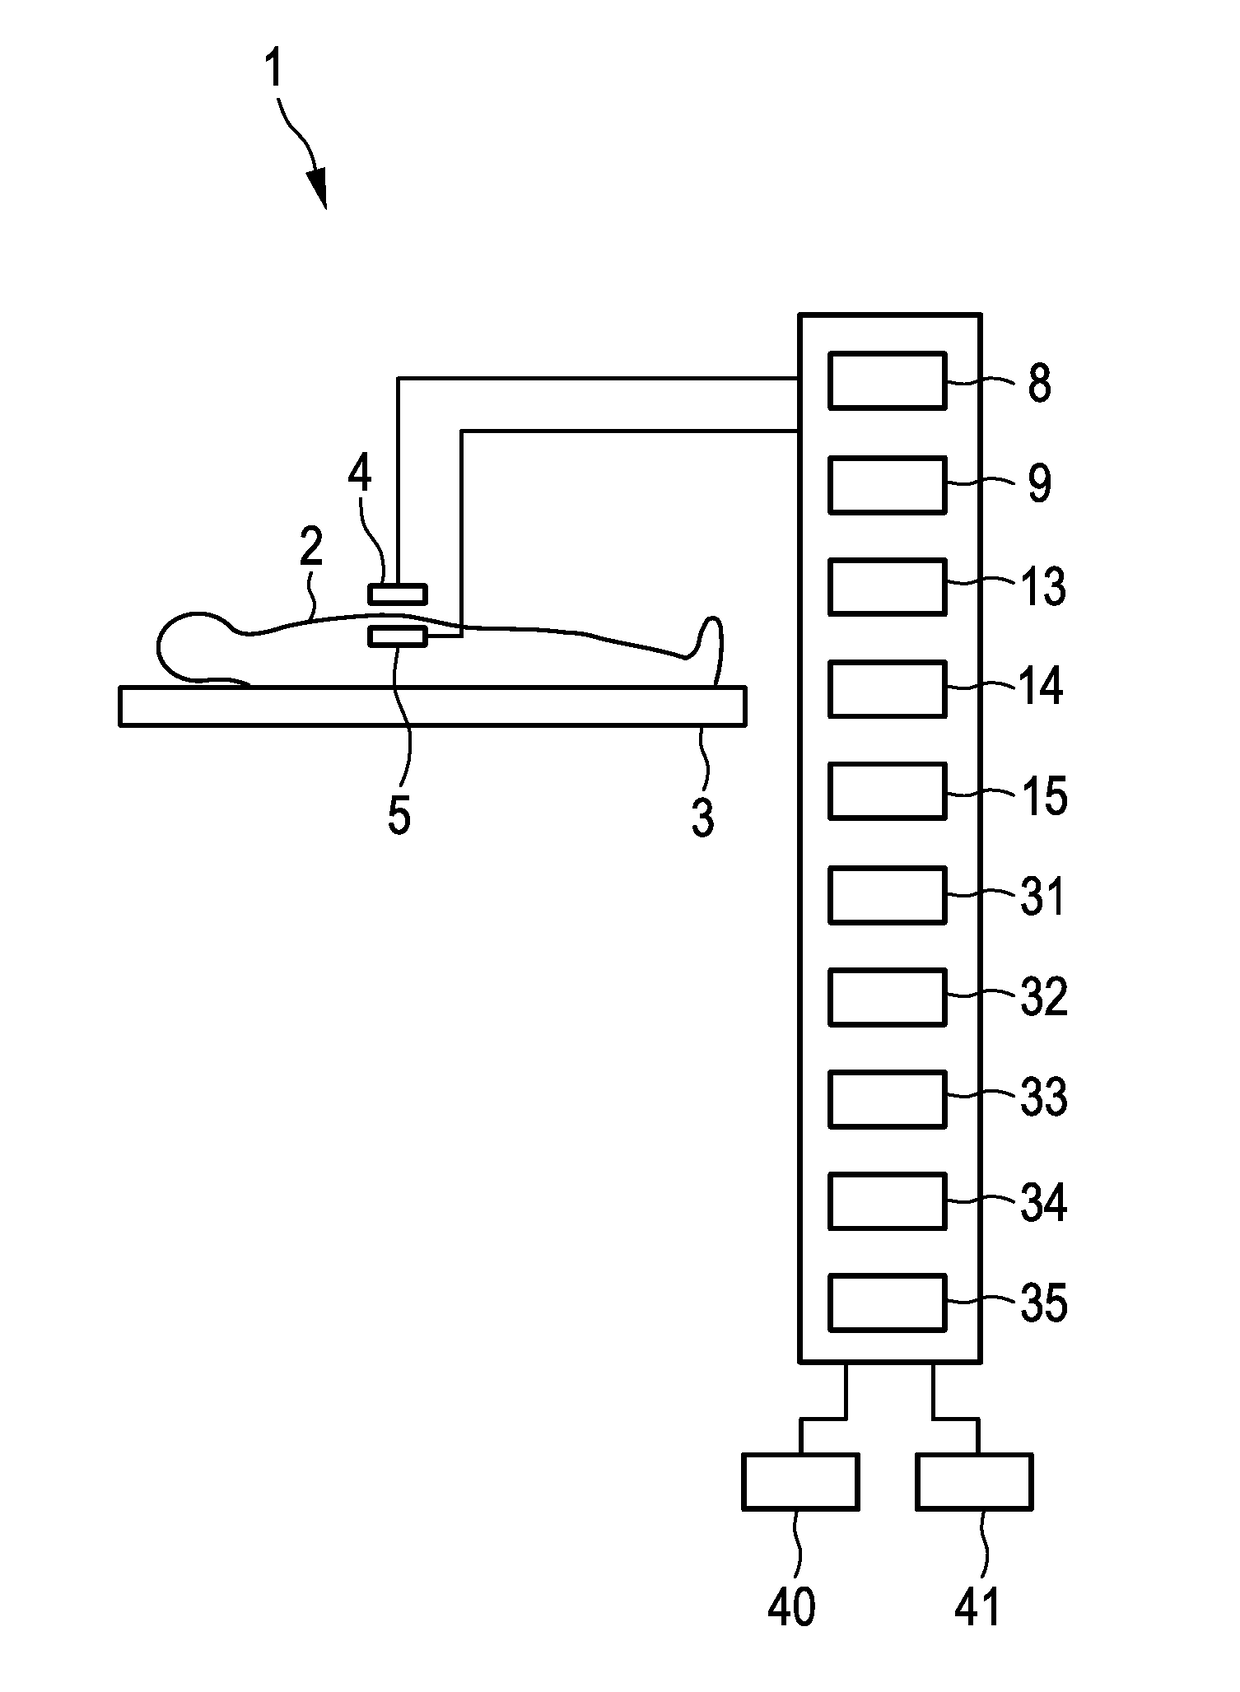 System for performing a therapeutic procedure